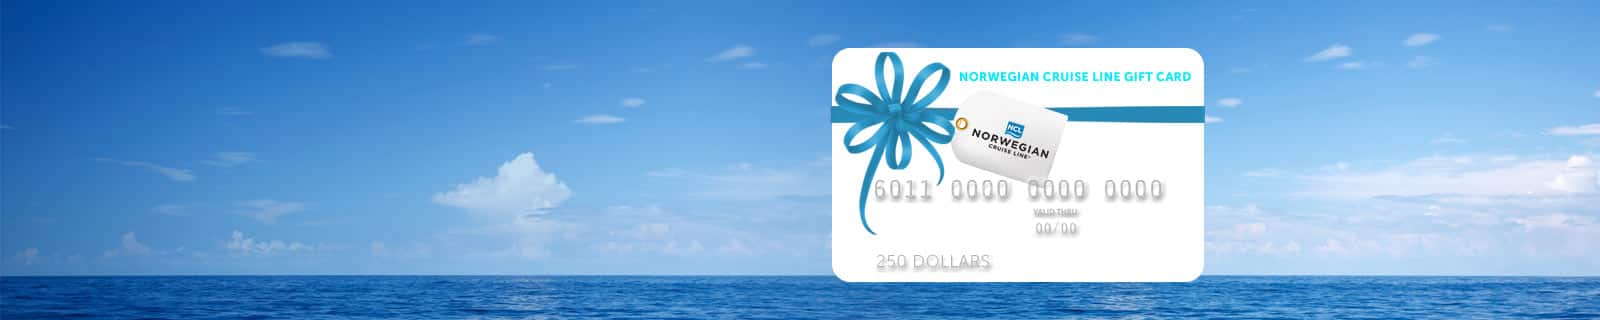 where to buy cruise gift cards